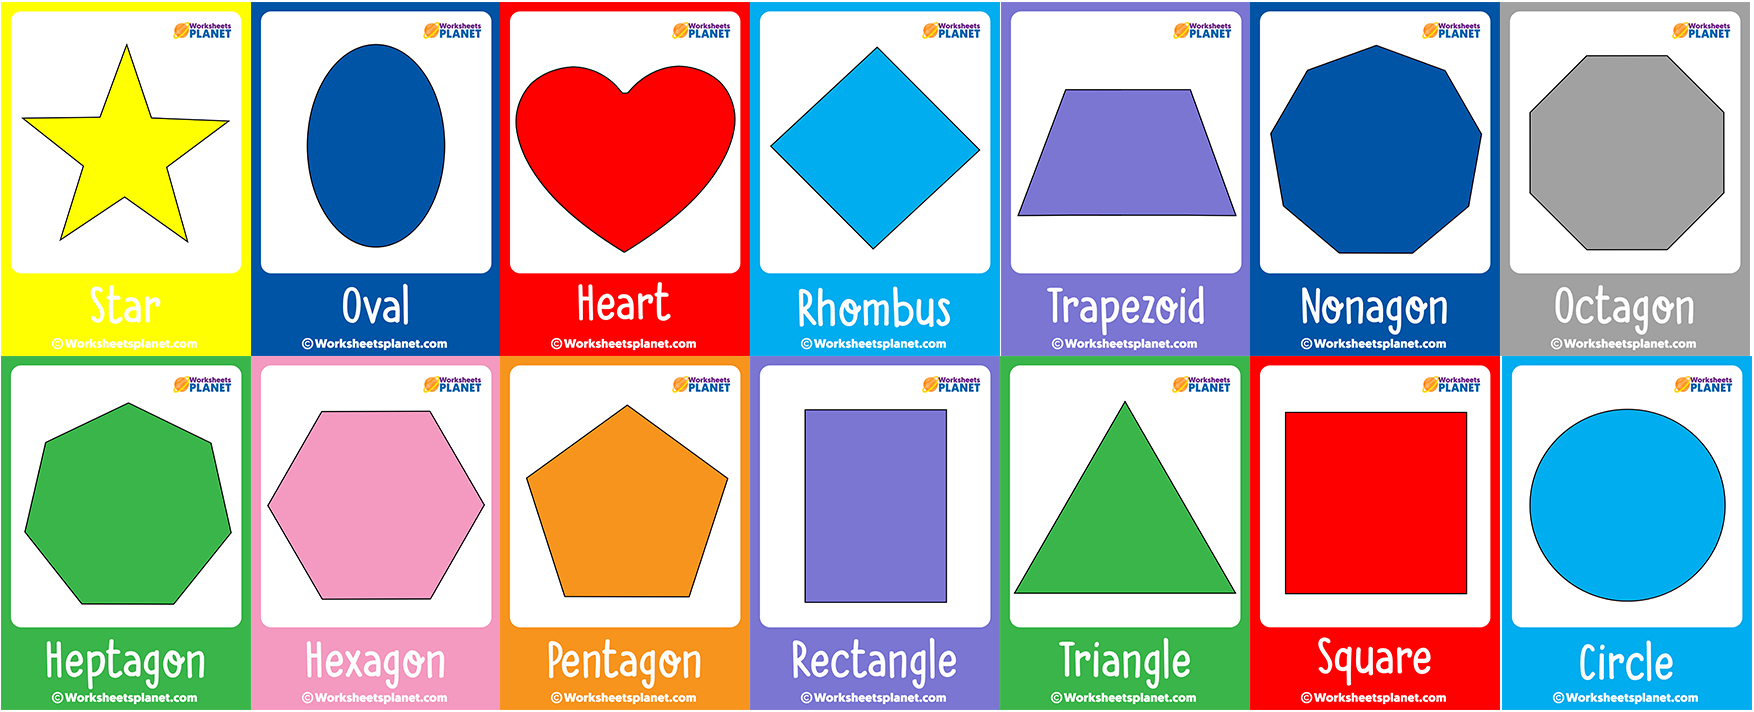 toys-shapes-printable-flashcards-learning-school-toys-games-sledp